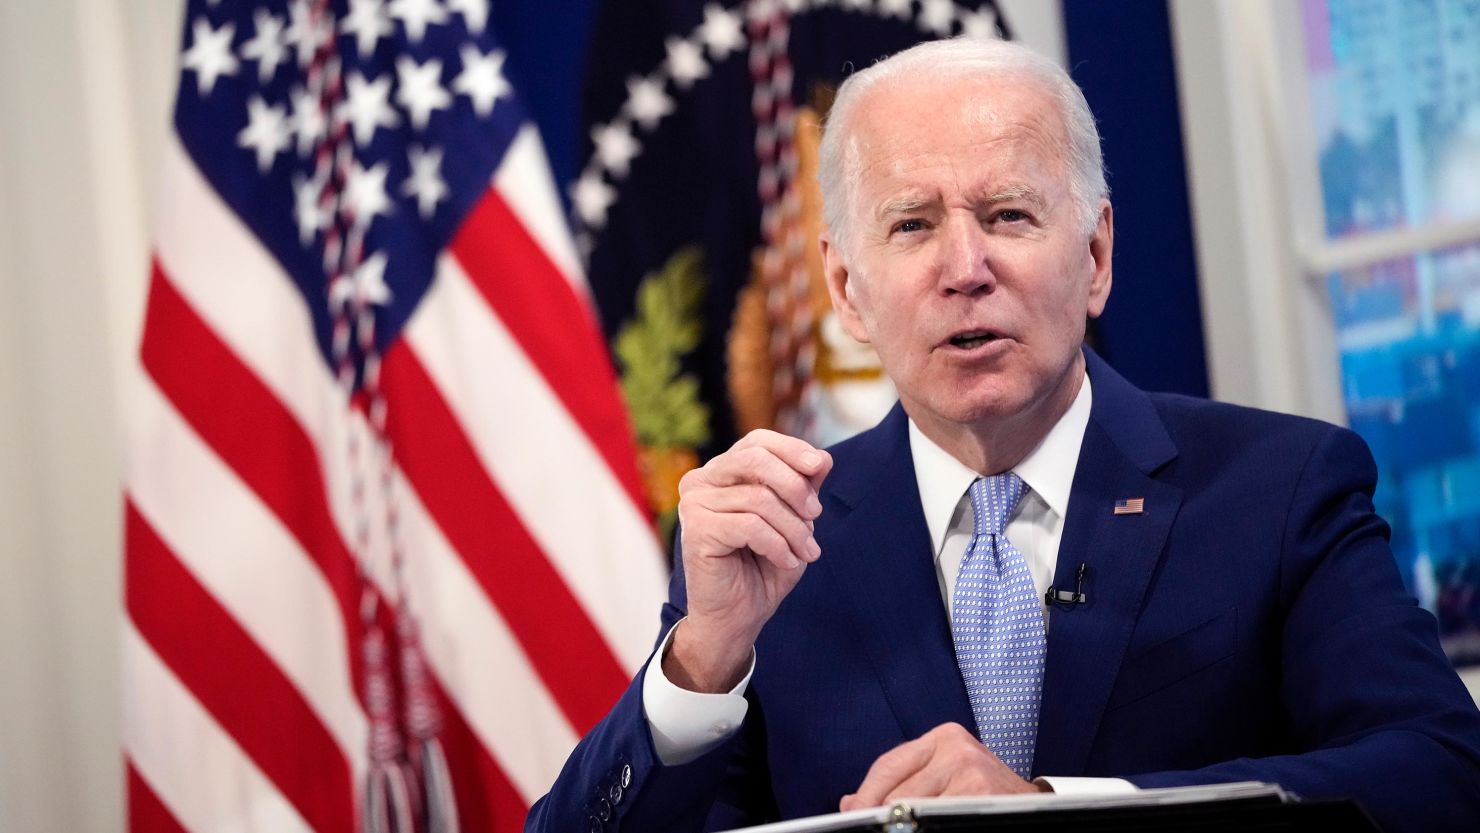 U.S. President Joe Biden speaks during a meeting with his administration's Supply Chain Disruptions Task Force and private sector CEOs in the South Court Auditorium of the White House December 22, 2021 in Washington, DC. 